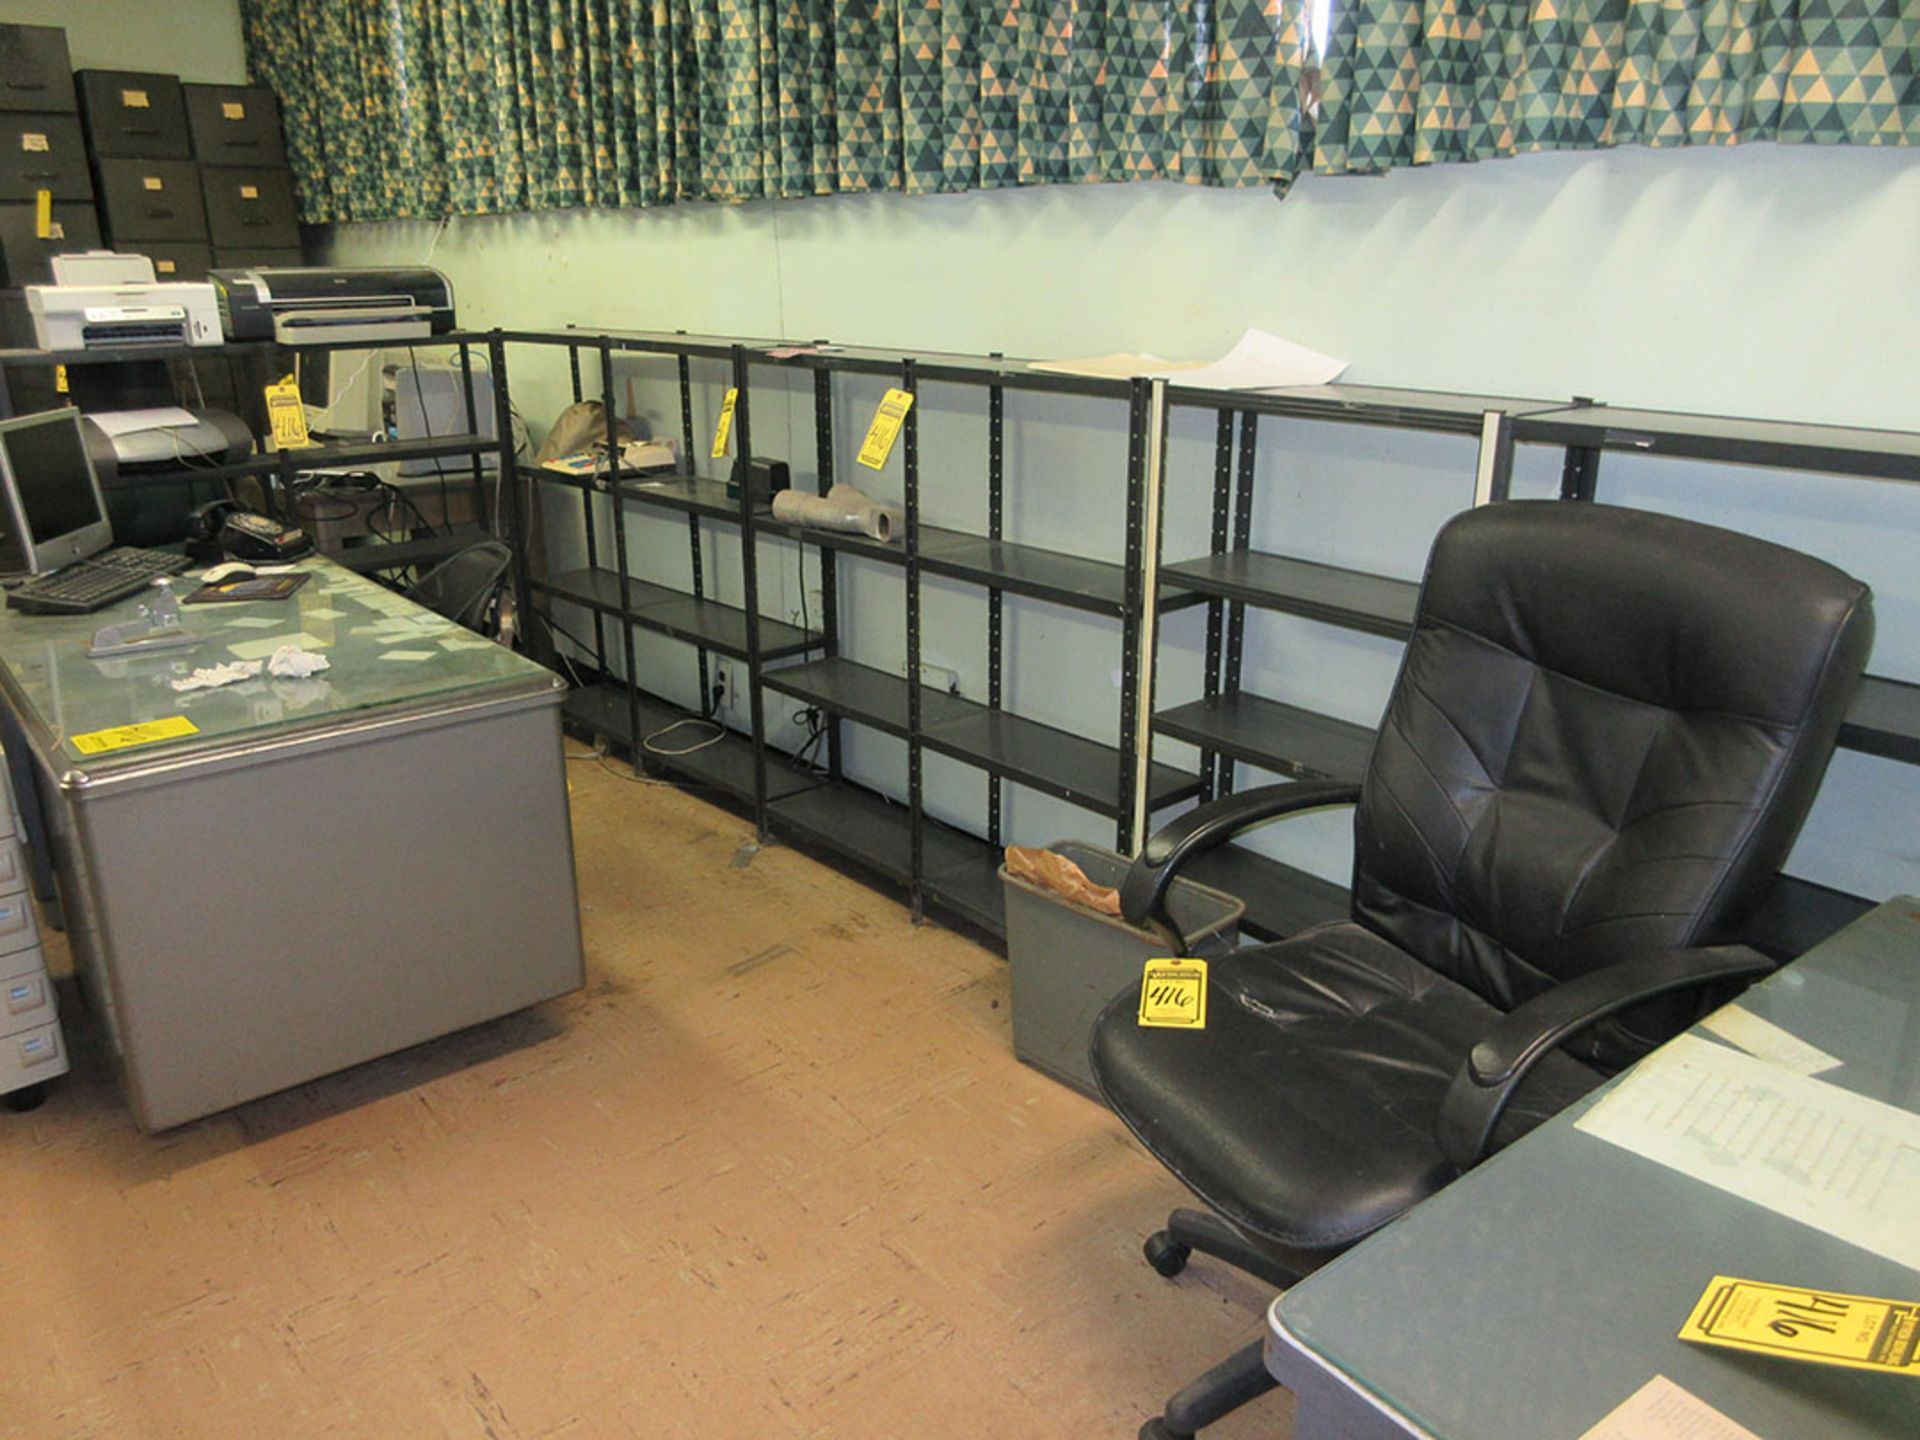 (3) DESKS, SHELF UNITS, CHAIRS, AND ANTIQUE OFFICE MACHINES